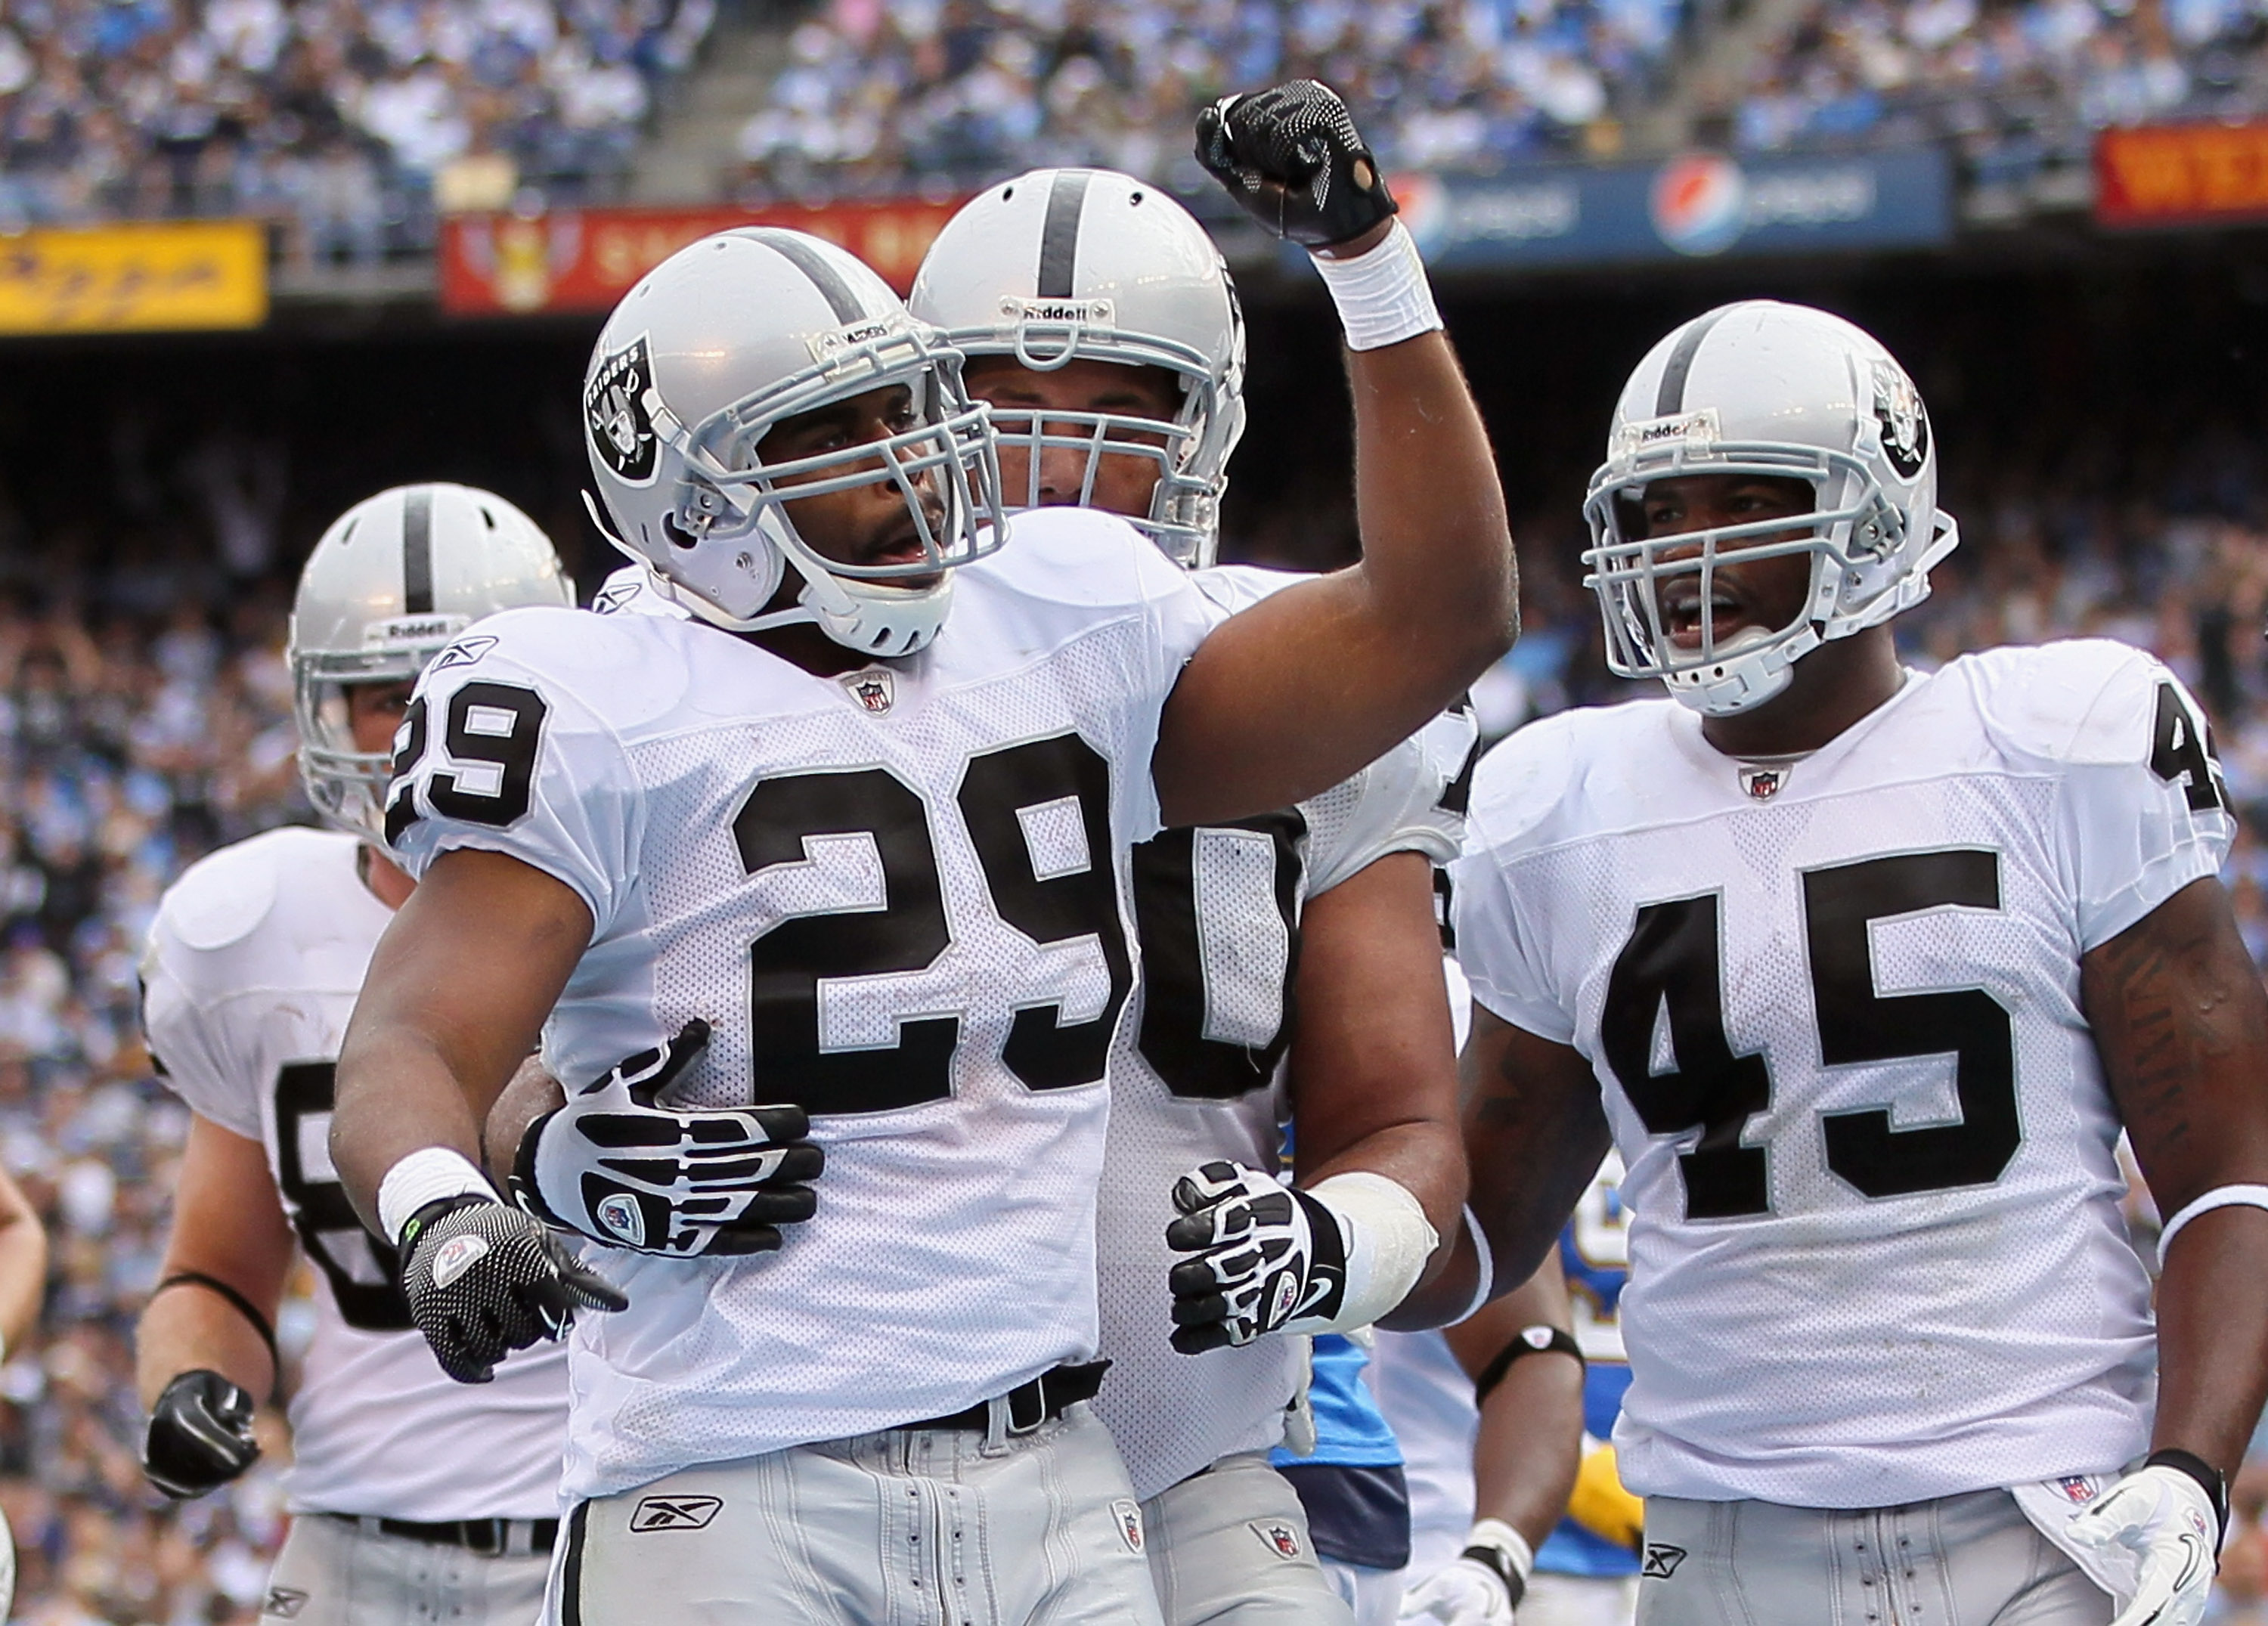 SAN DIEGO - DECEMBER 05:  (L-R) Michael Bush #29, Langston Walker #70 and Marcel Reece #45 of the Oakland Raiders celebrate Bush's touchdown in the second quarter against the San Diego Chargers at Qualcomm Stadium on December 5, 2010 in San Diego, Califor